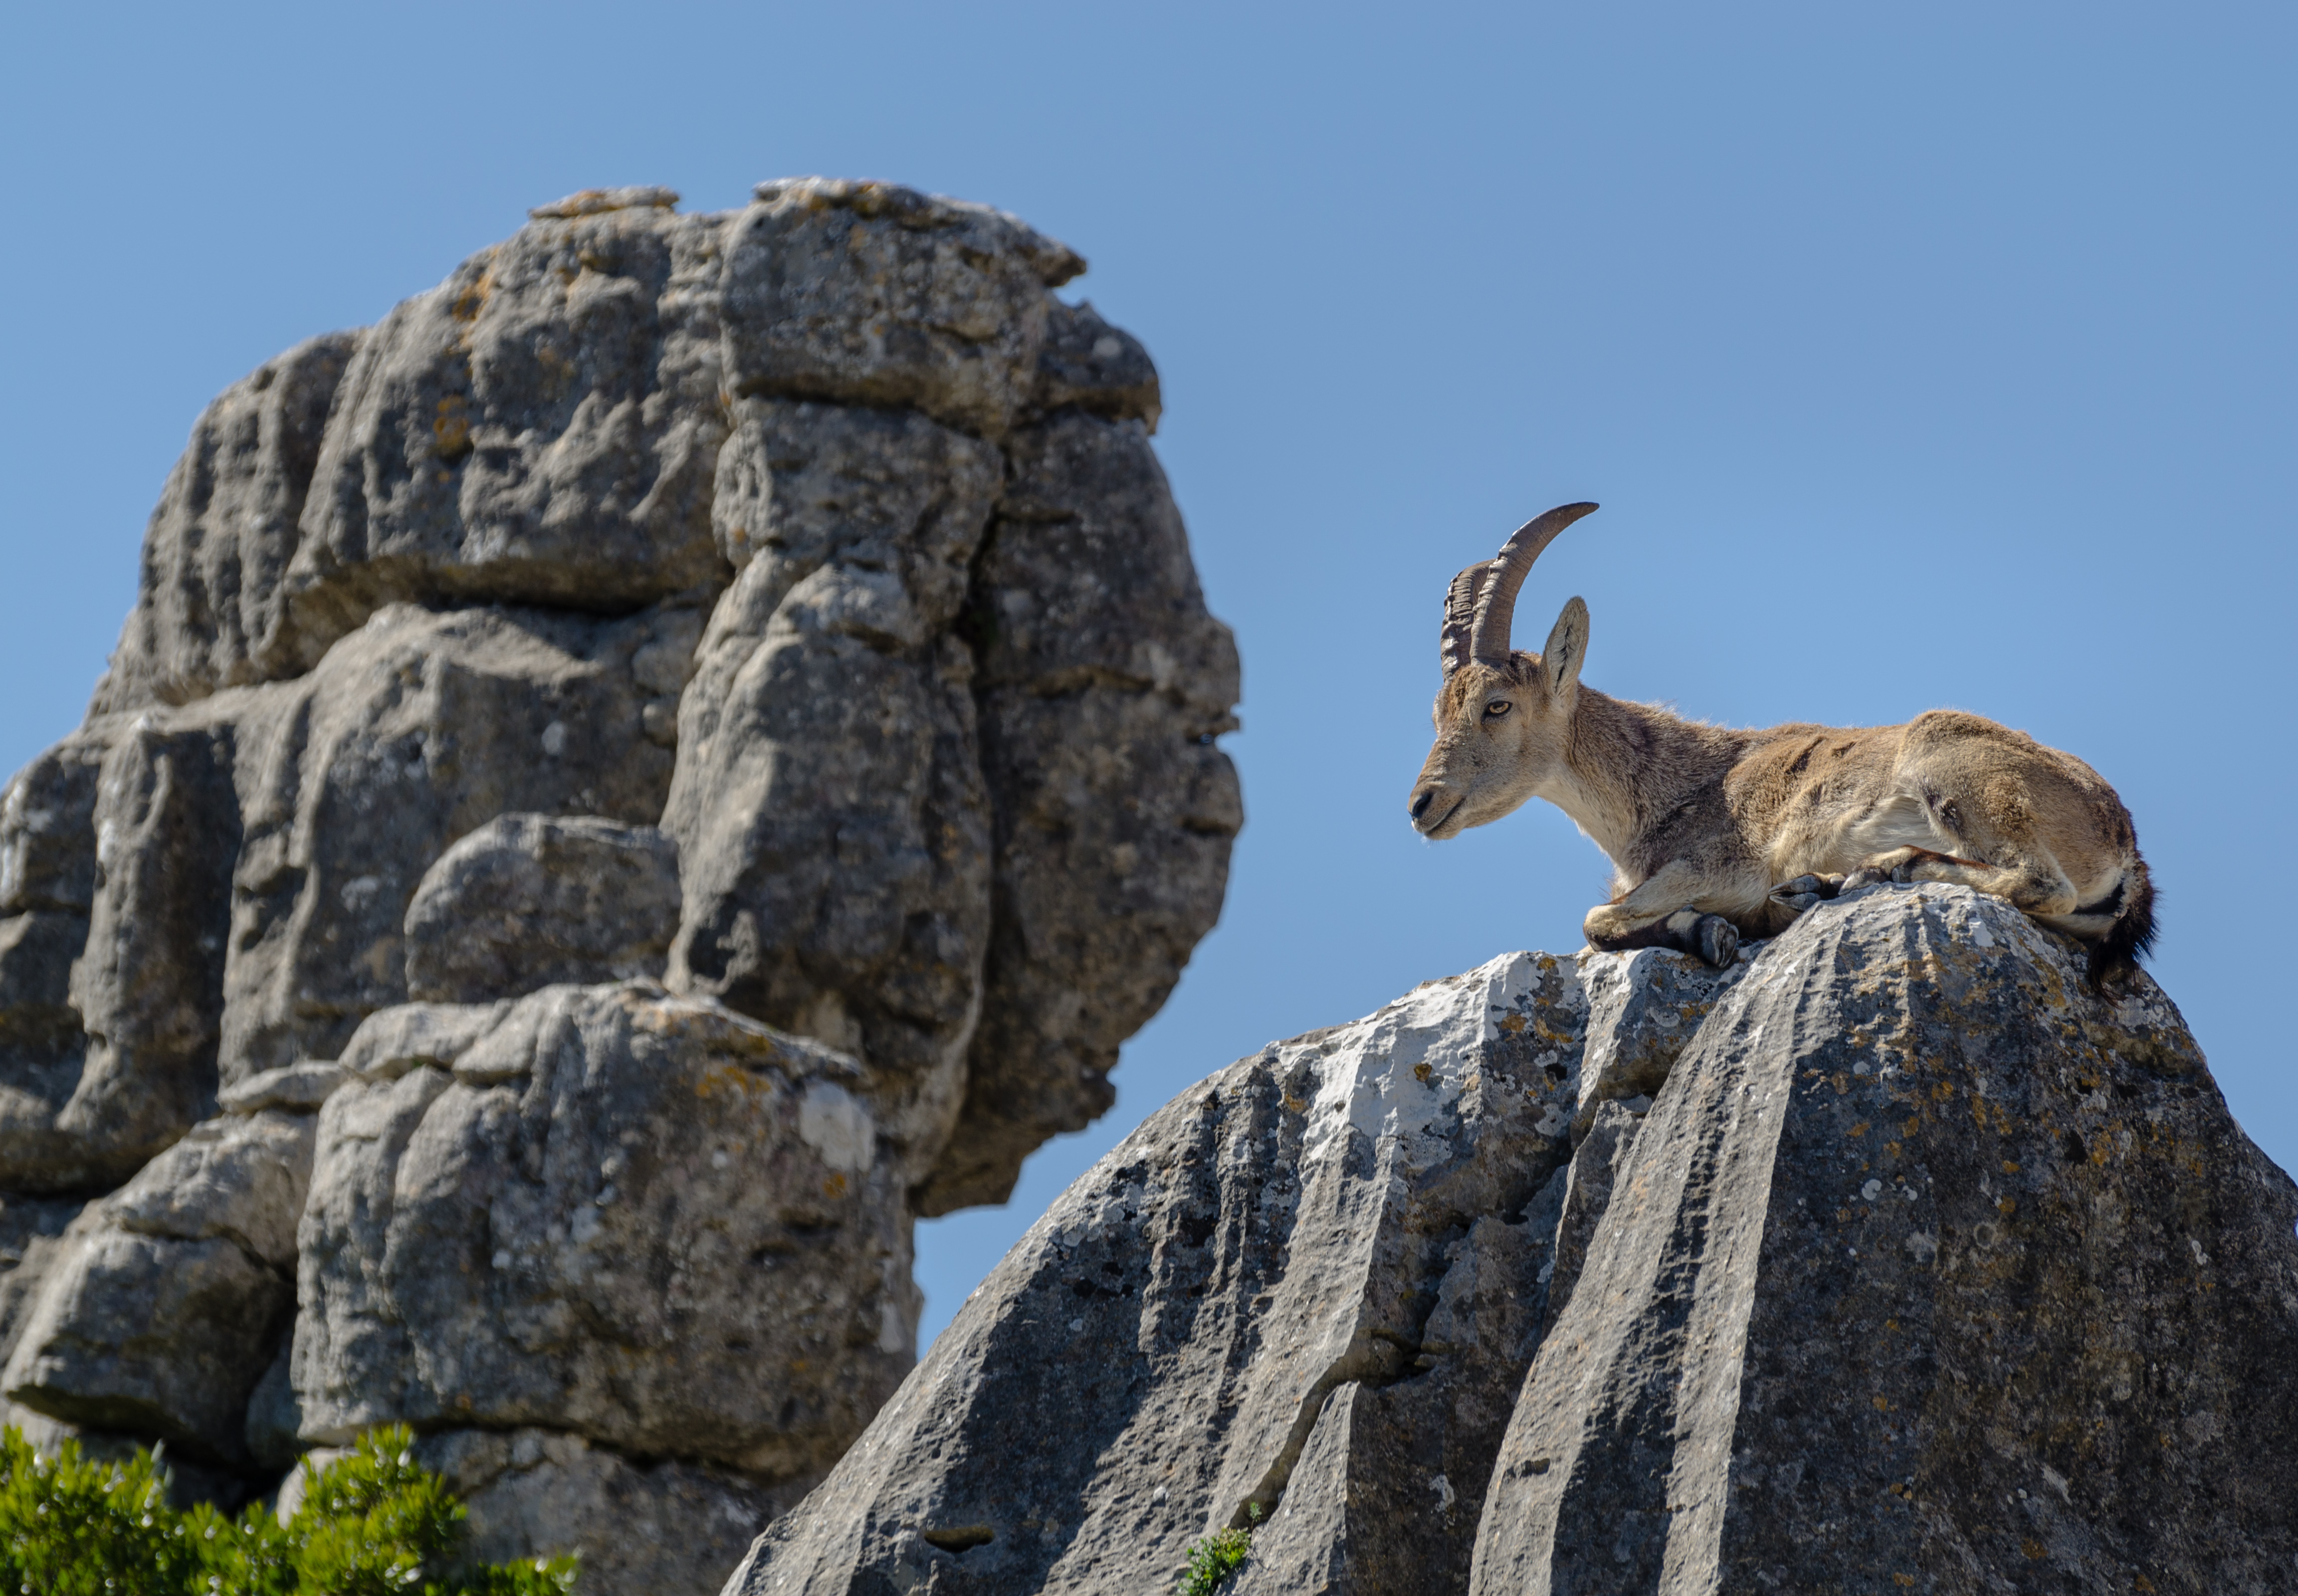 "El Torcal Iberiensteinbock 2014" by Tuxyso - Own work. Licensed under Creative Commons Attribution-Share Alike 3.0 via Wikimedia Commons - http://commons.wikimedia.org/wiki/File:El_Torcal_Iberiensteinbock_2014.jpg#mediaviewer/File:El_Torcal_Iberiensteinbock_2014.jpg